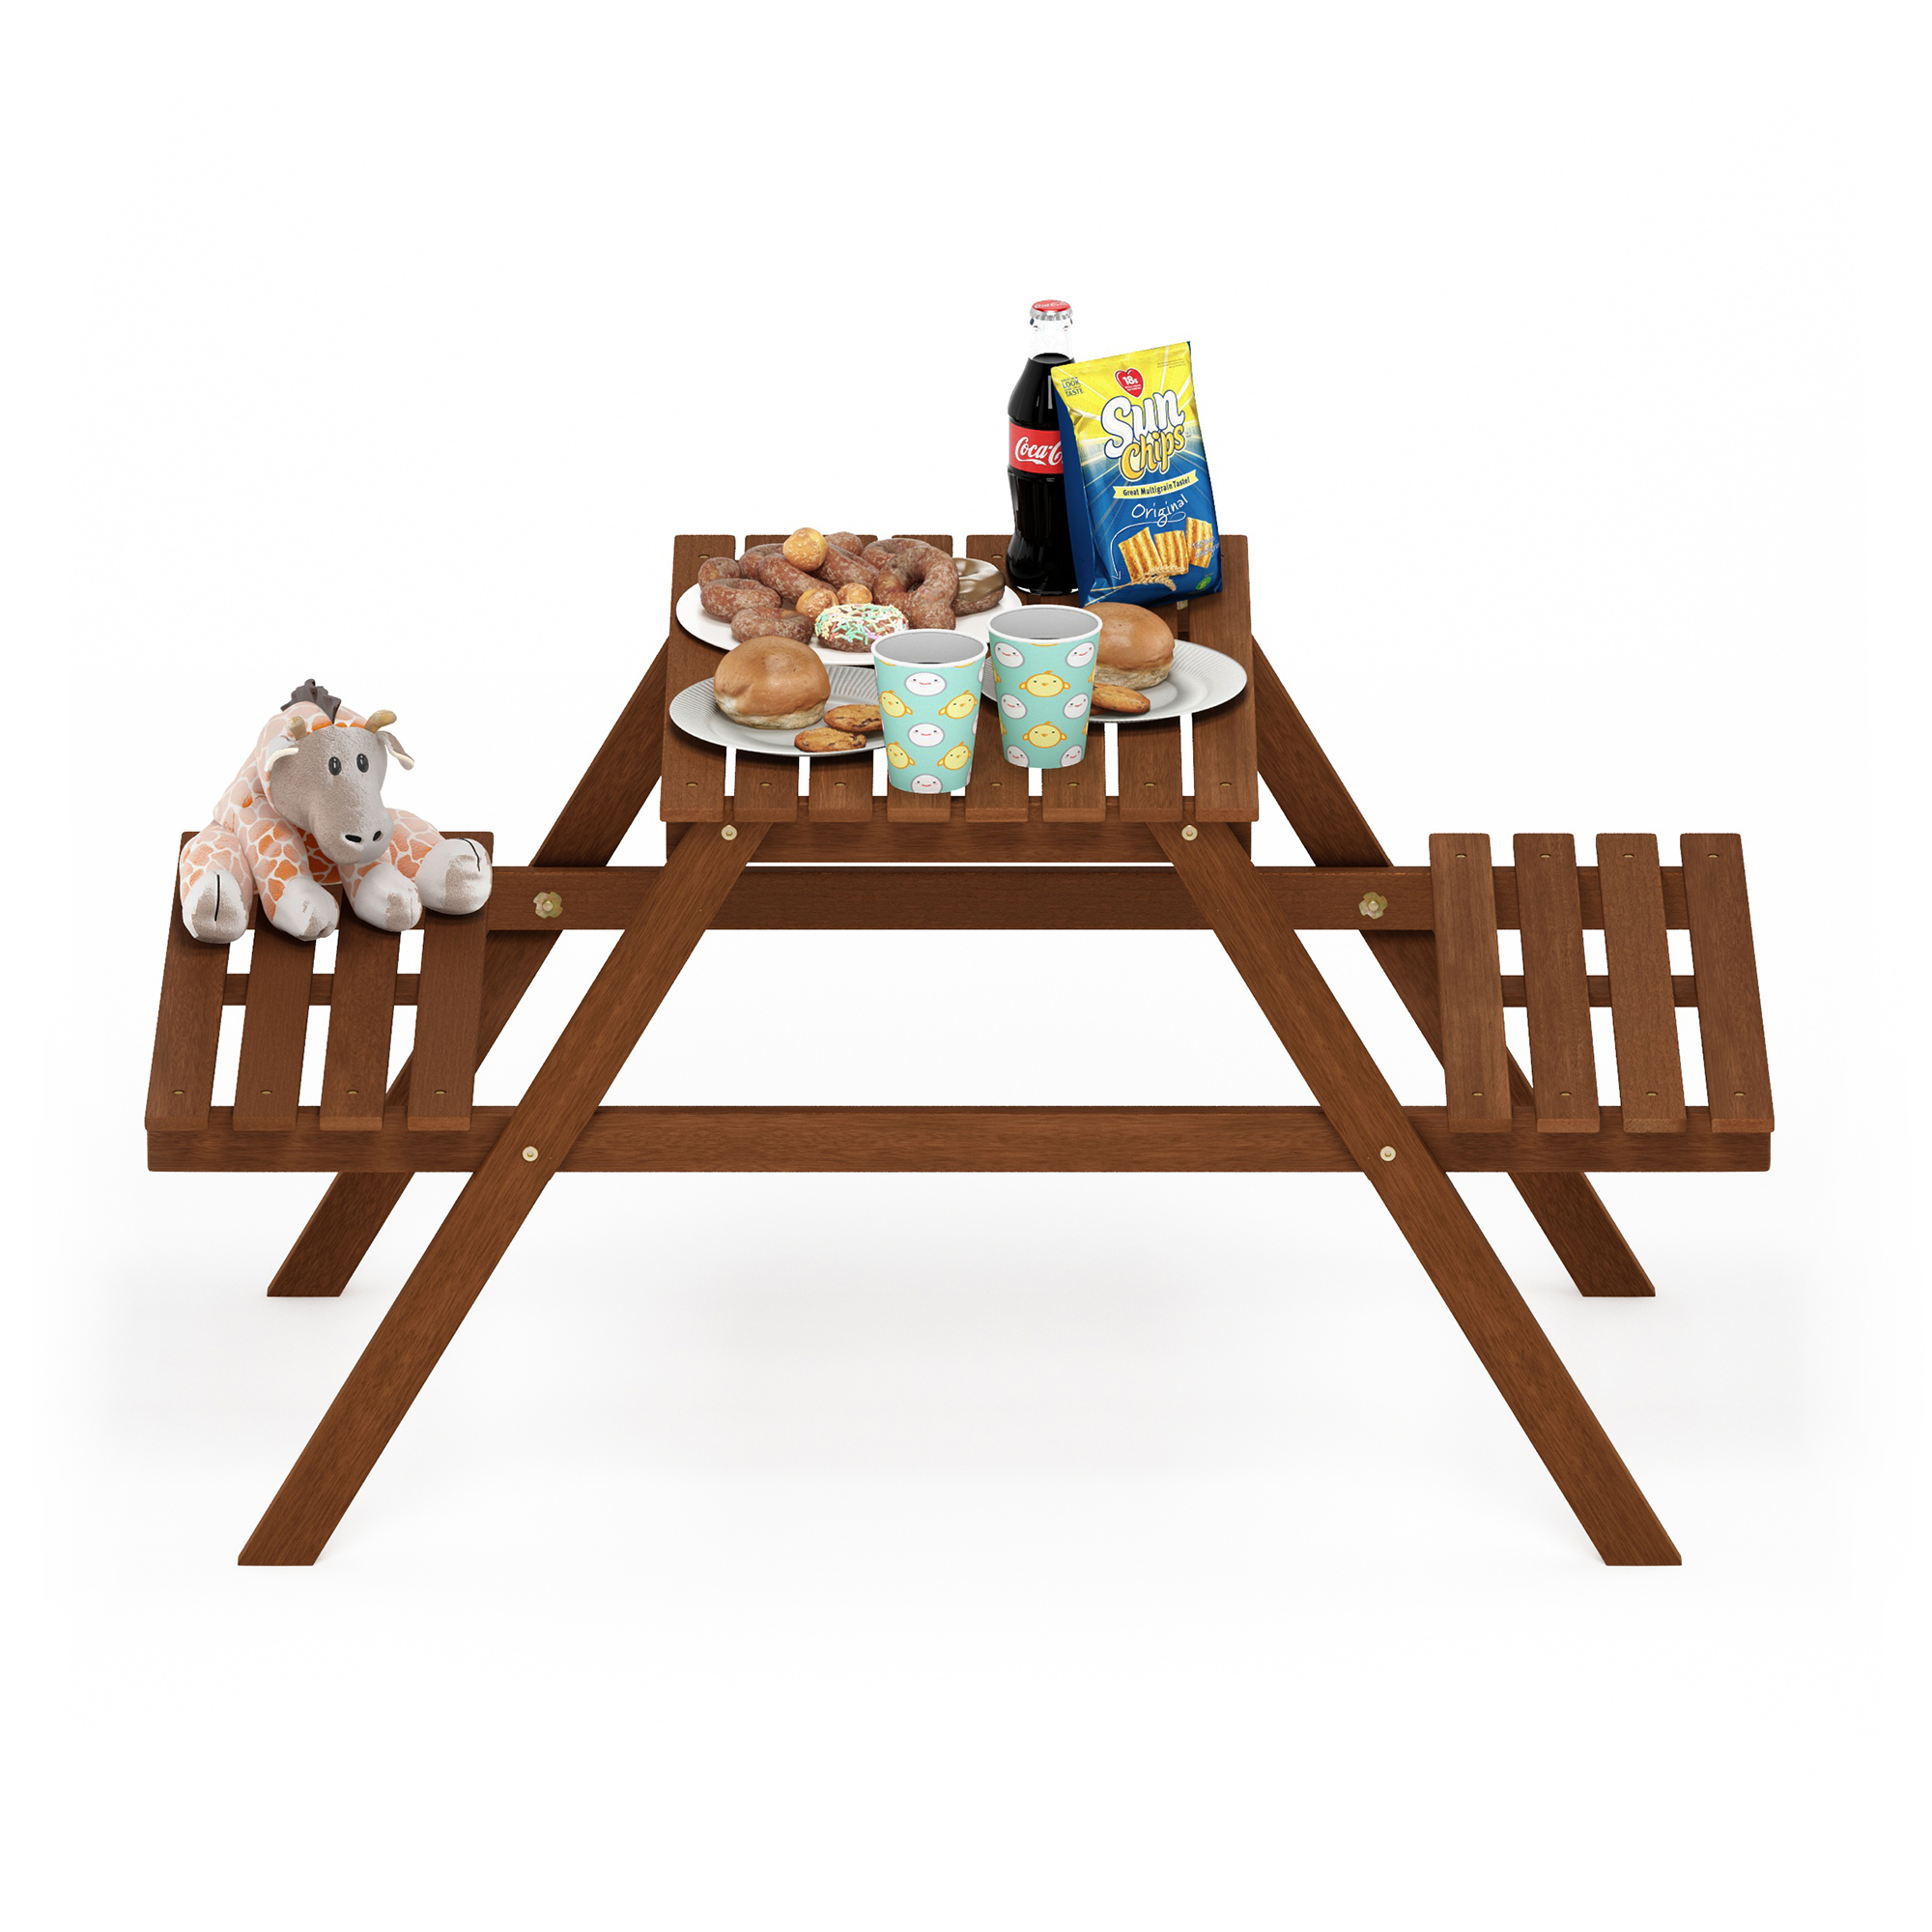 Furinno Tioman Hardwood Kids Picnic Table and Chair Set in Teak Oil - image 5 of 6